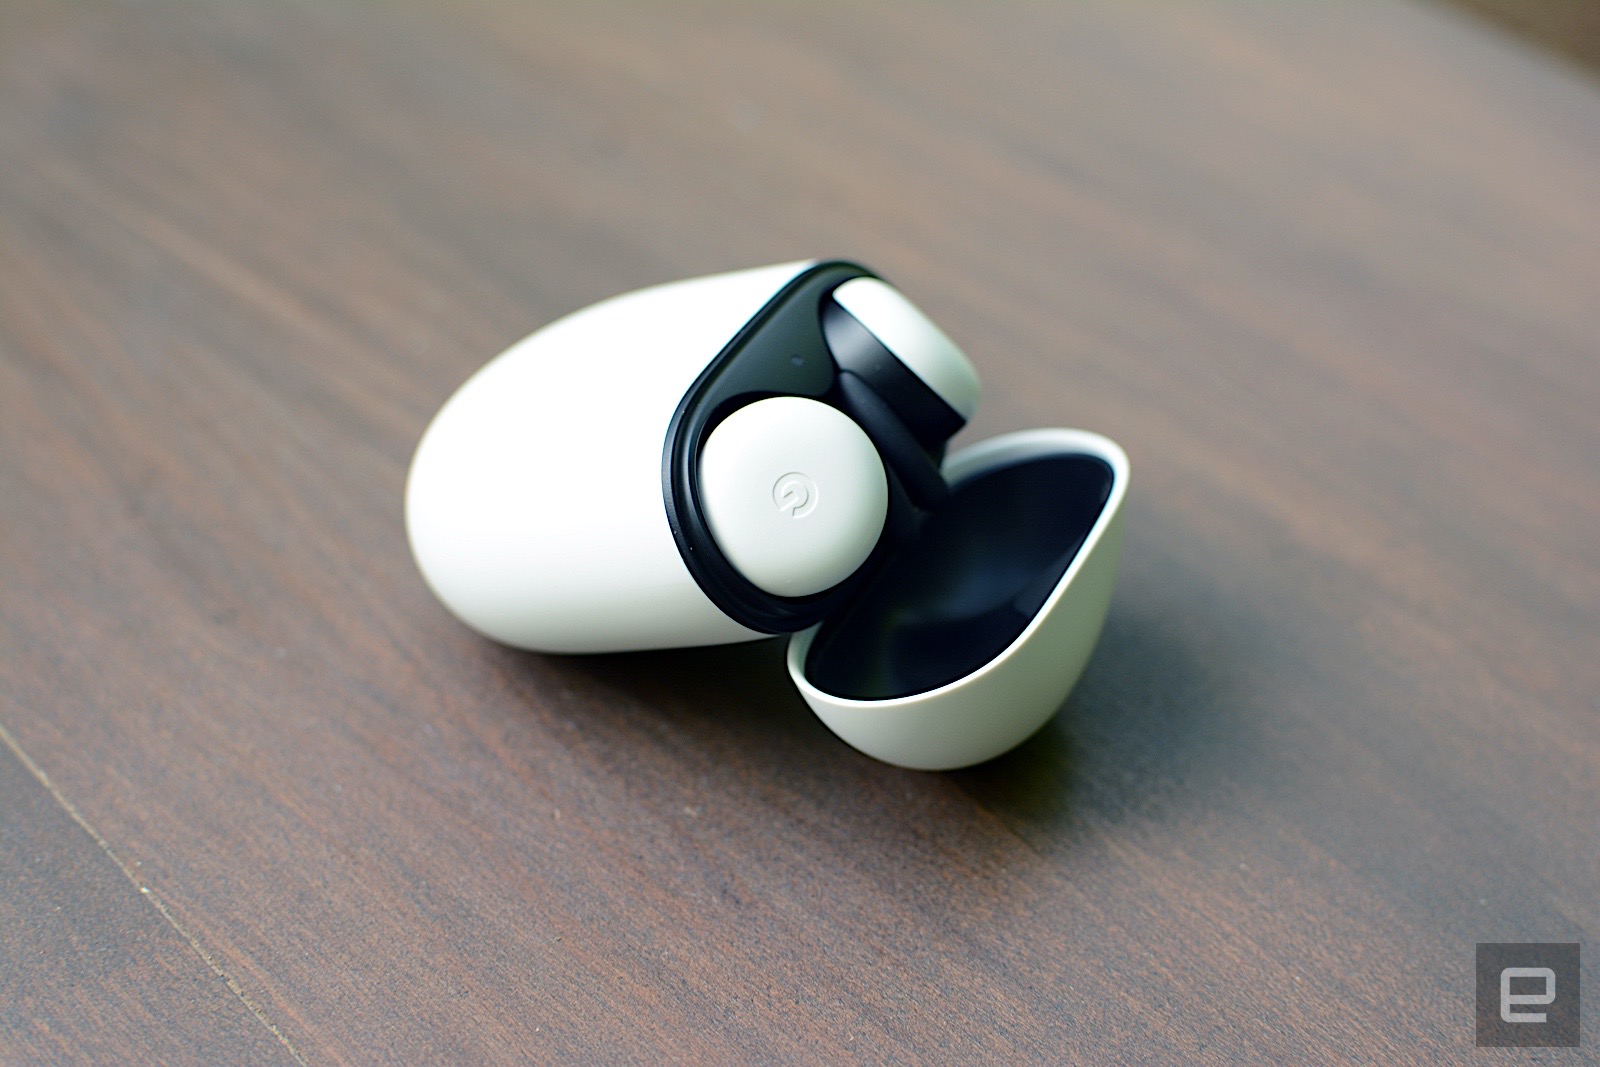 Google's latest acquisition could lead to spatial audio for the Pixel Buds